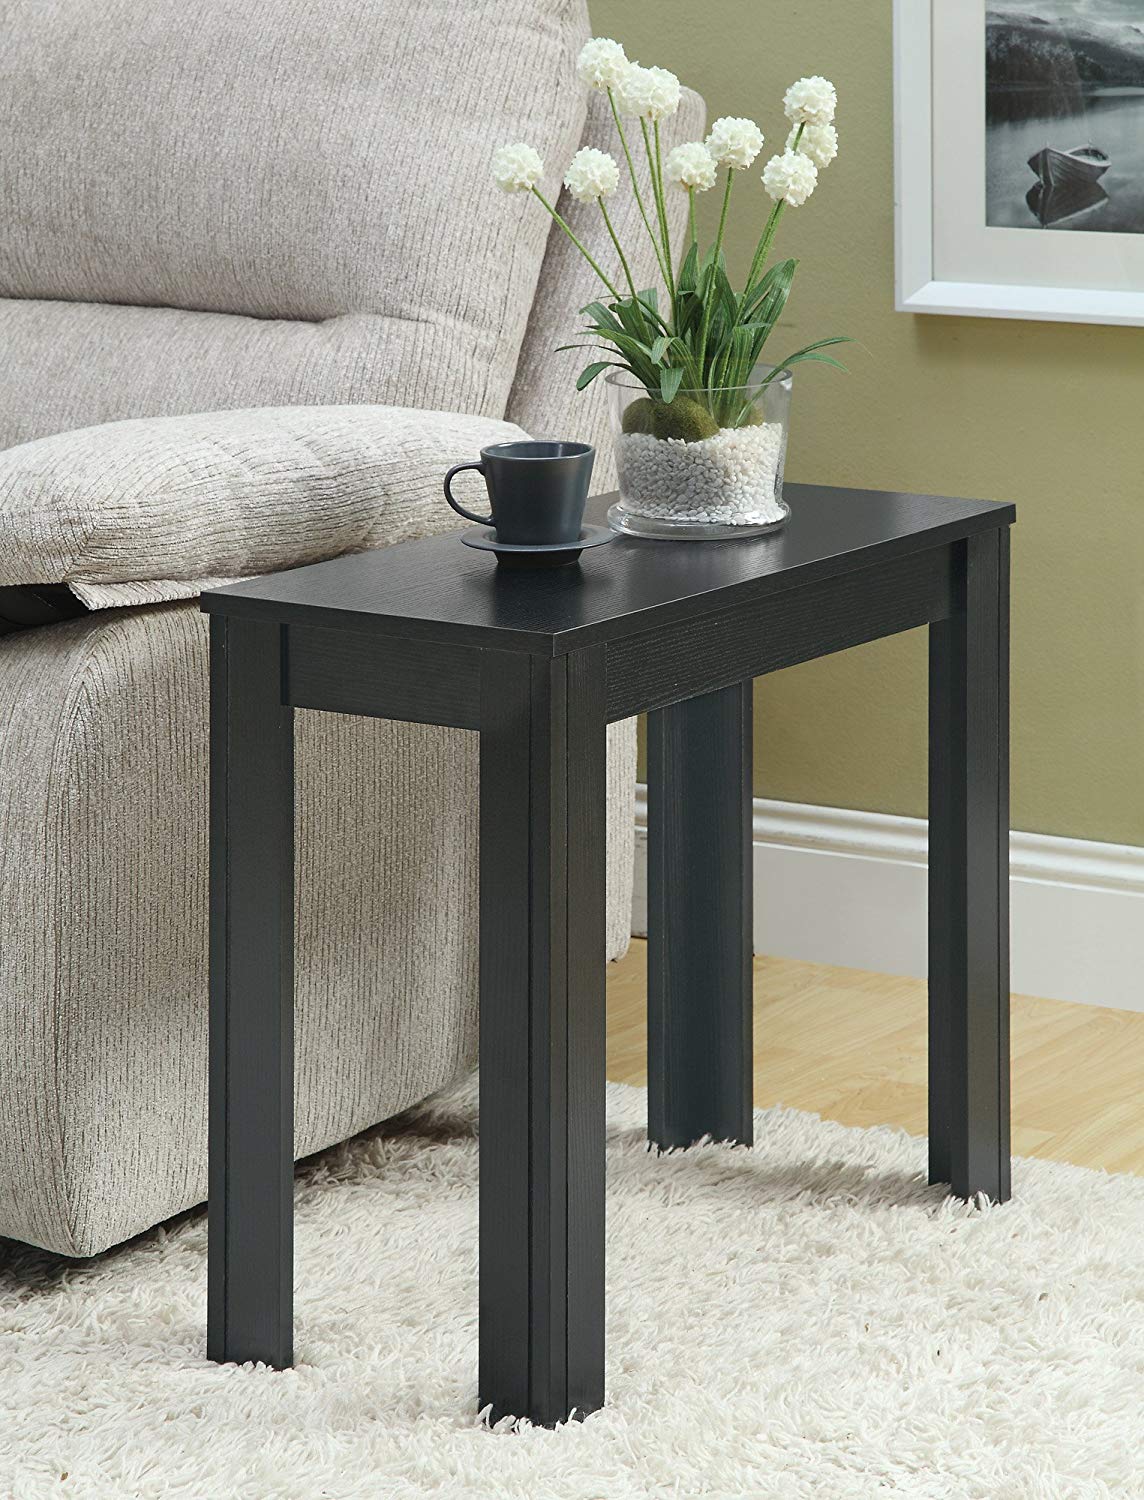 monarch specialties black oak accent side table kitchen finish end tables dining island legs unfinished floor lamp height high small lamps living room center decor round glass top